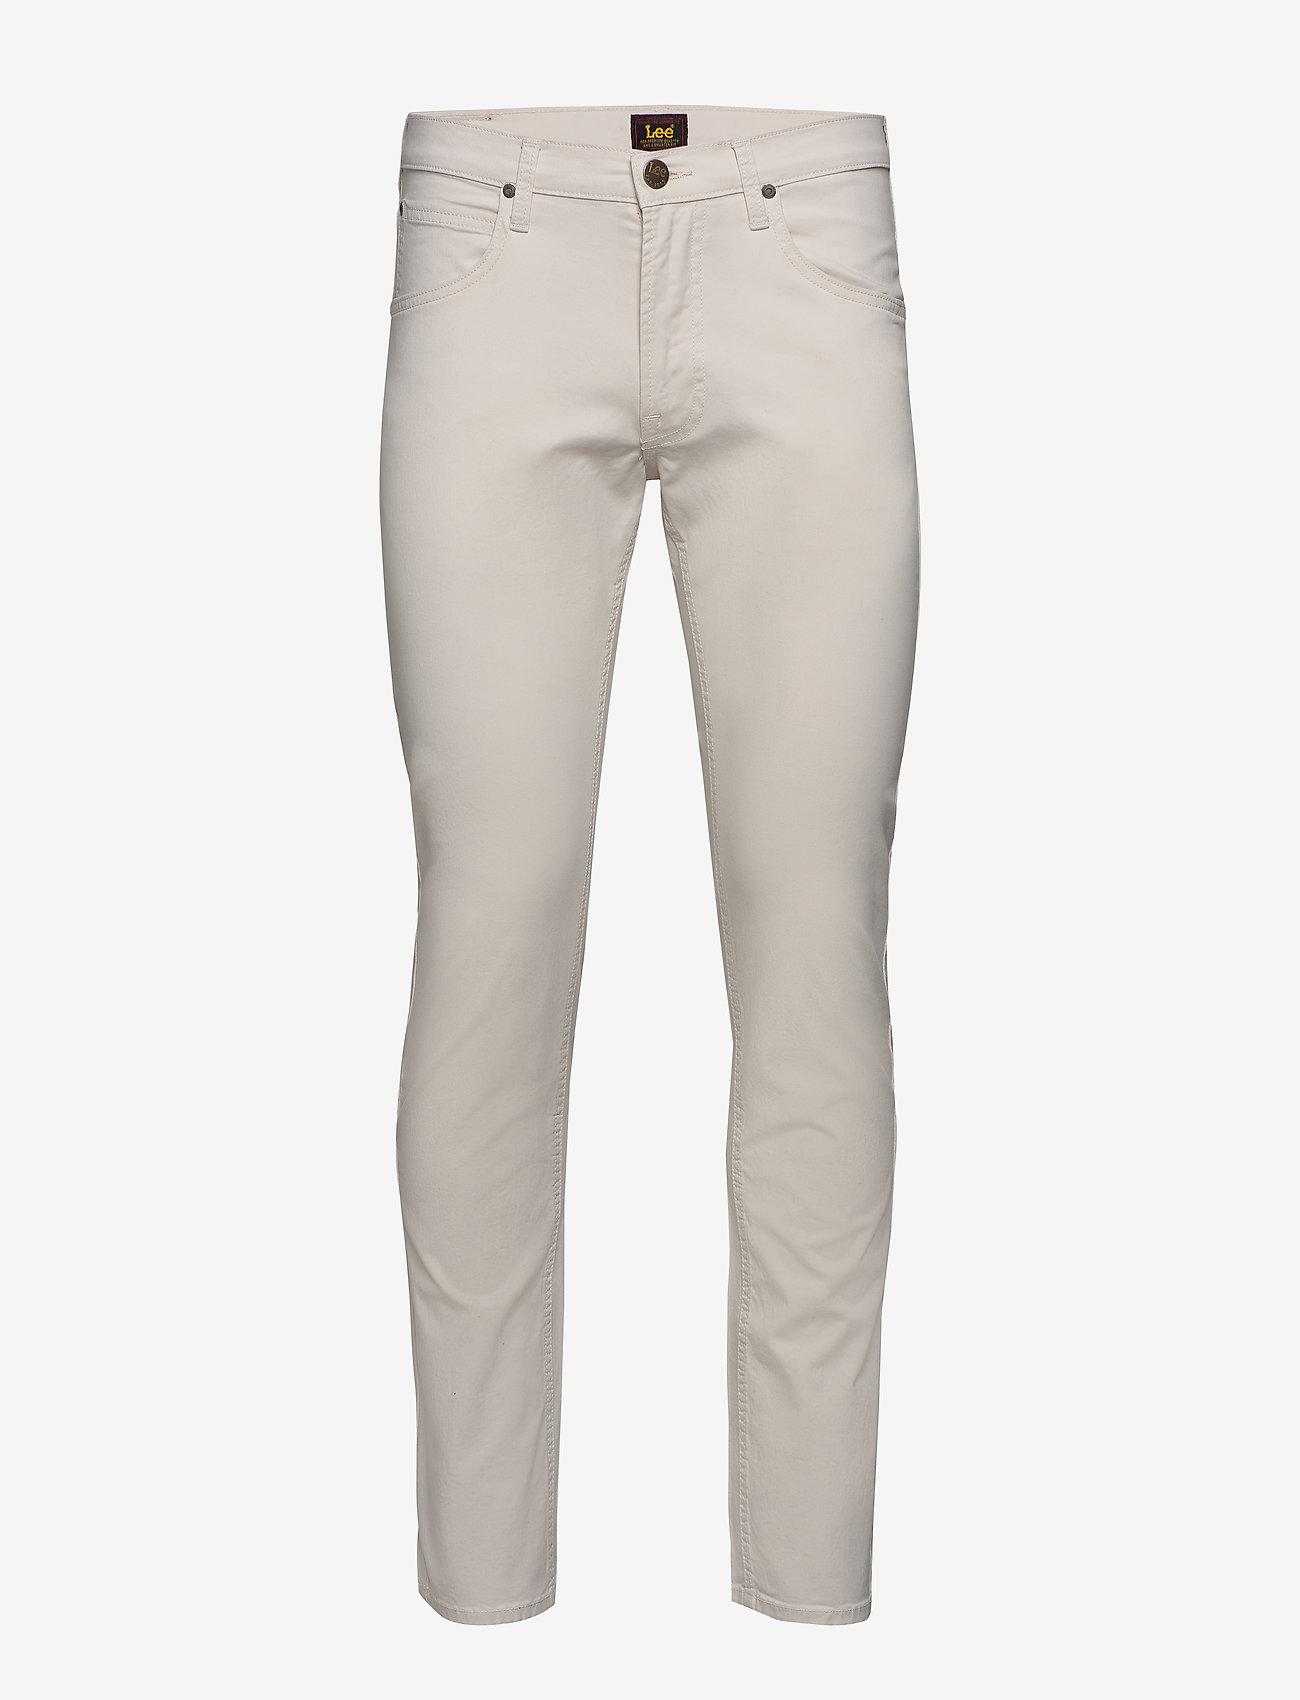 white lee jeans